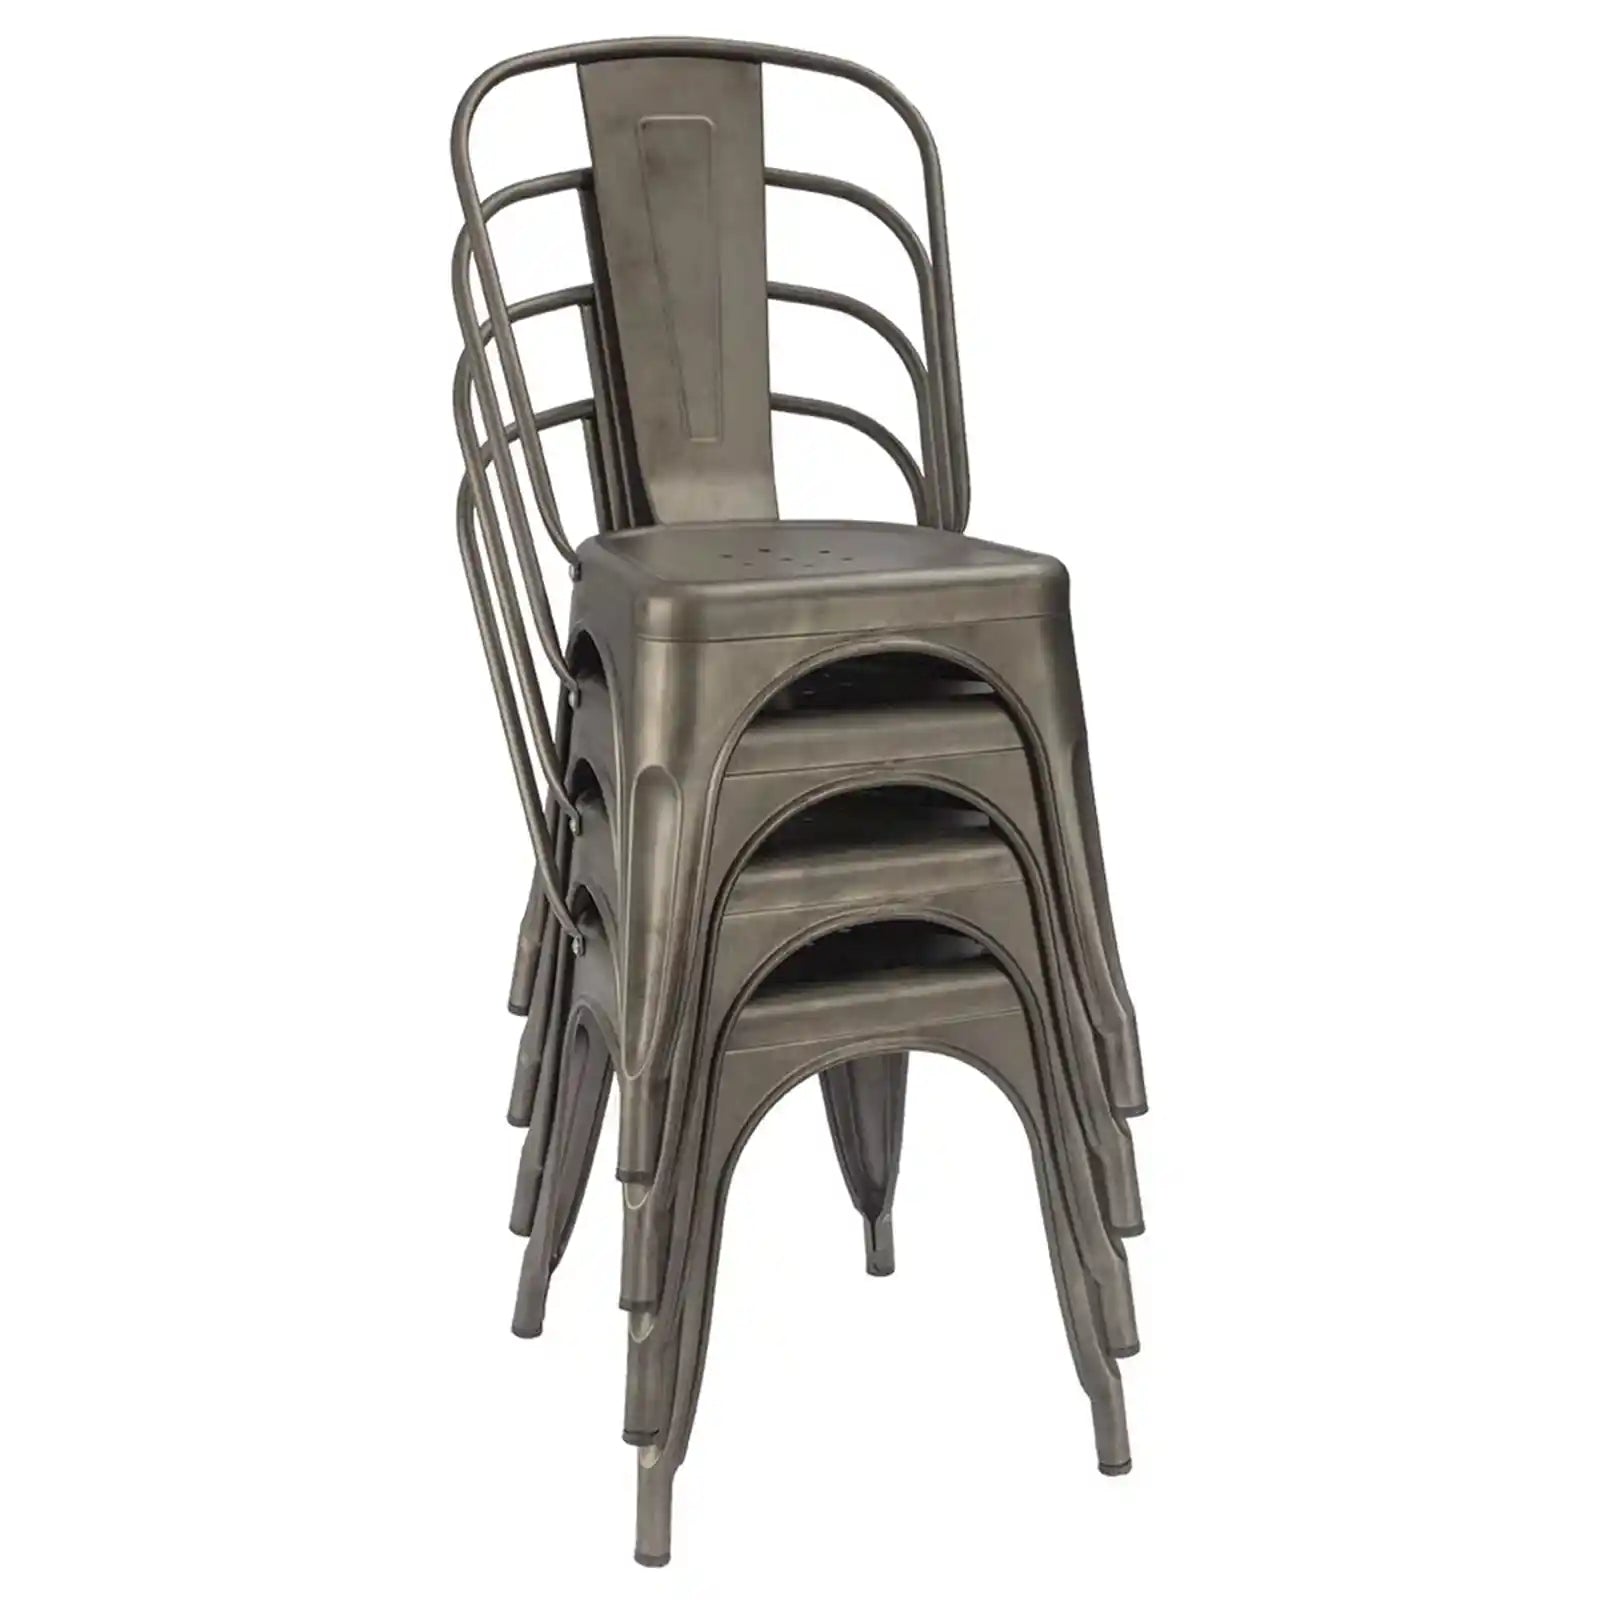 Metal Dining Chair Indoor-Outdoor Use Stackable Classic Trattoria Chair Fashion Dining Metal Side Chairs for Bistro Cafe Restaurant Set of 4